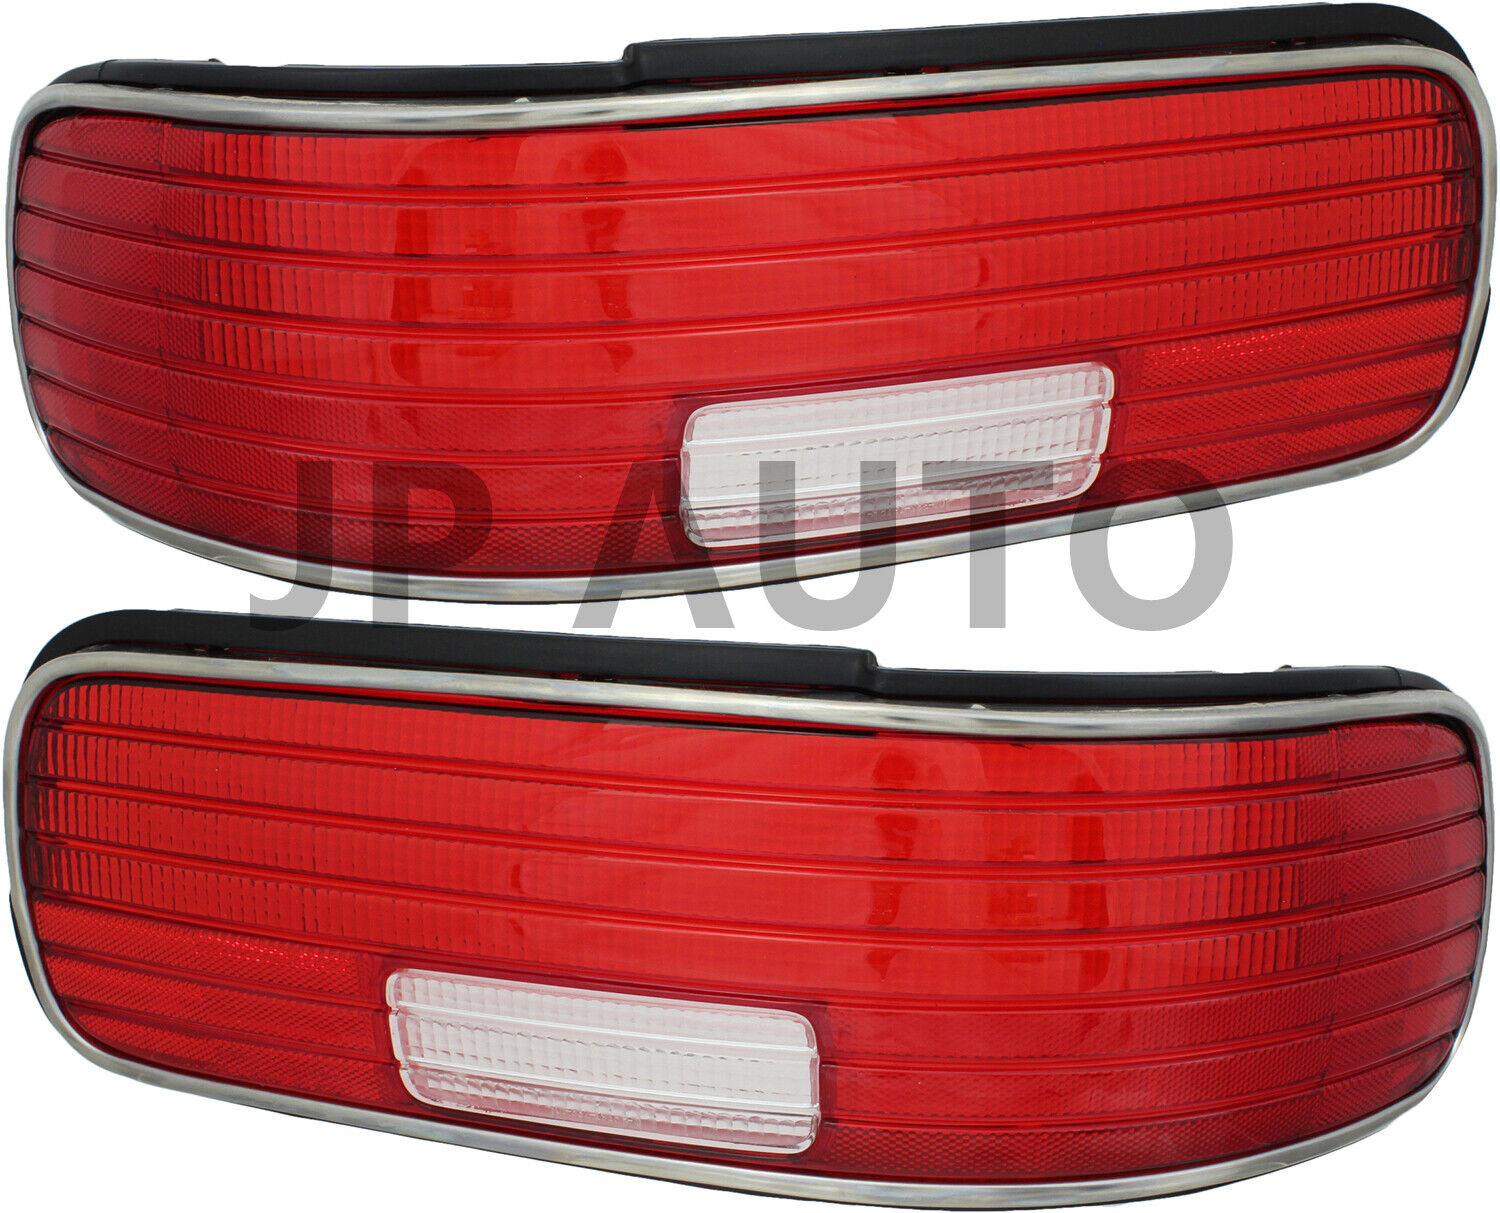 For 1993-1996 Chevrolet Caprice Tail Light Set Driver and Passenger Side